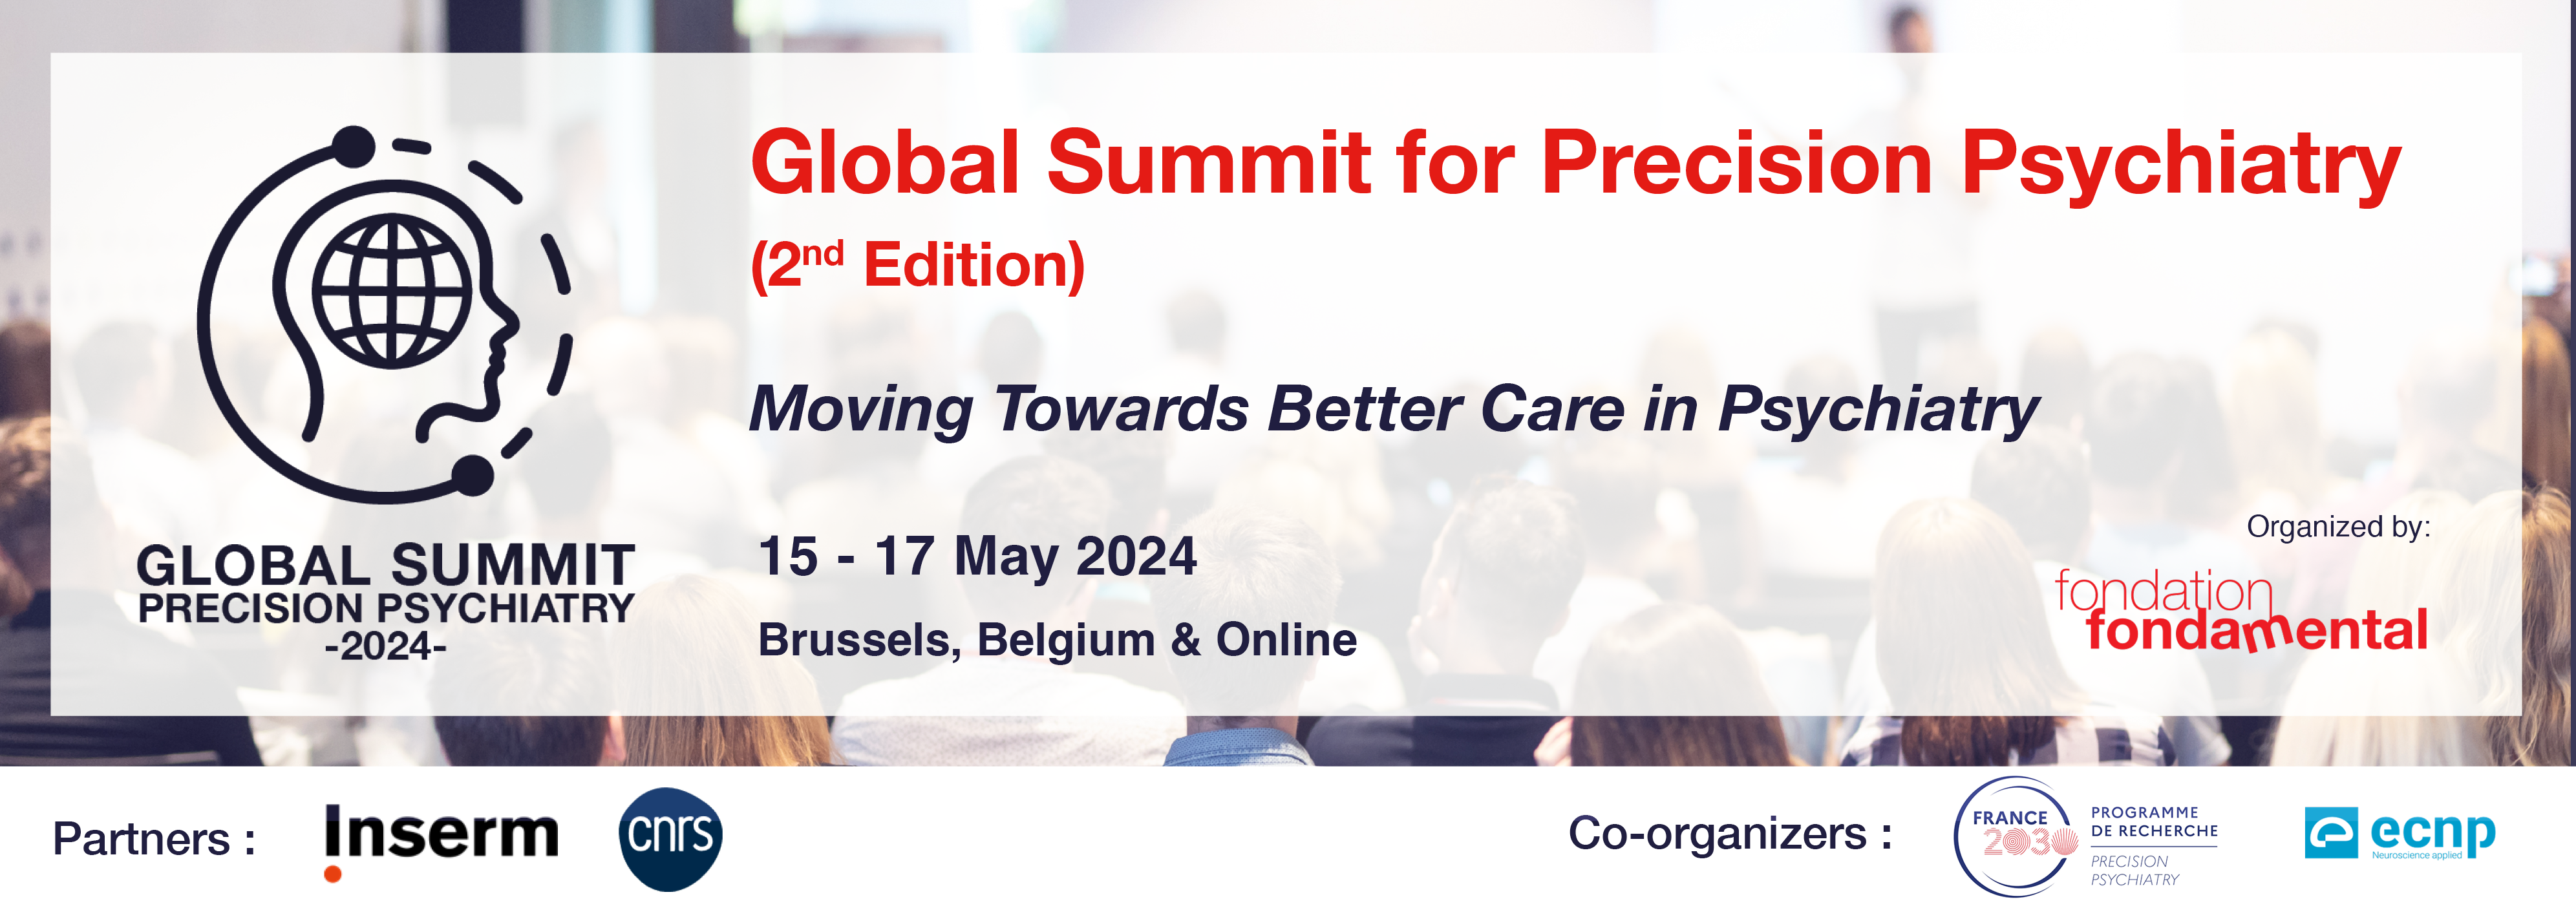 Global Summit for Precision Psychiatry 2024